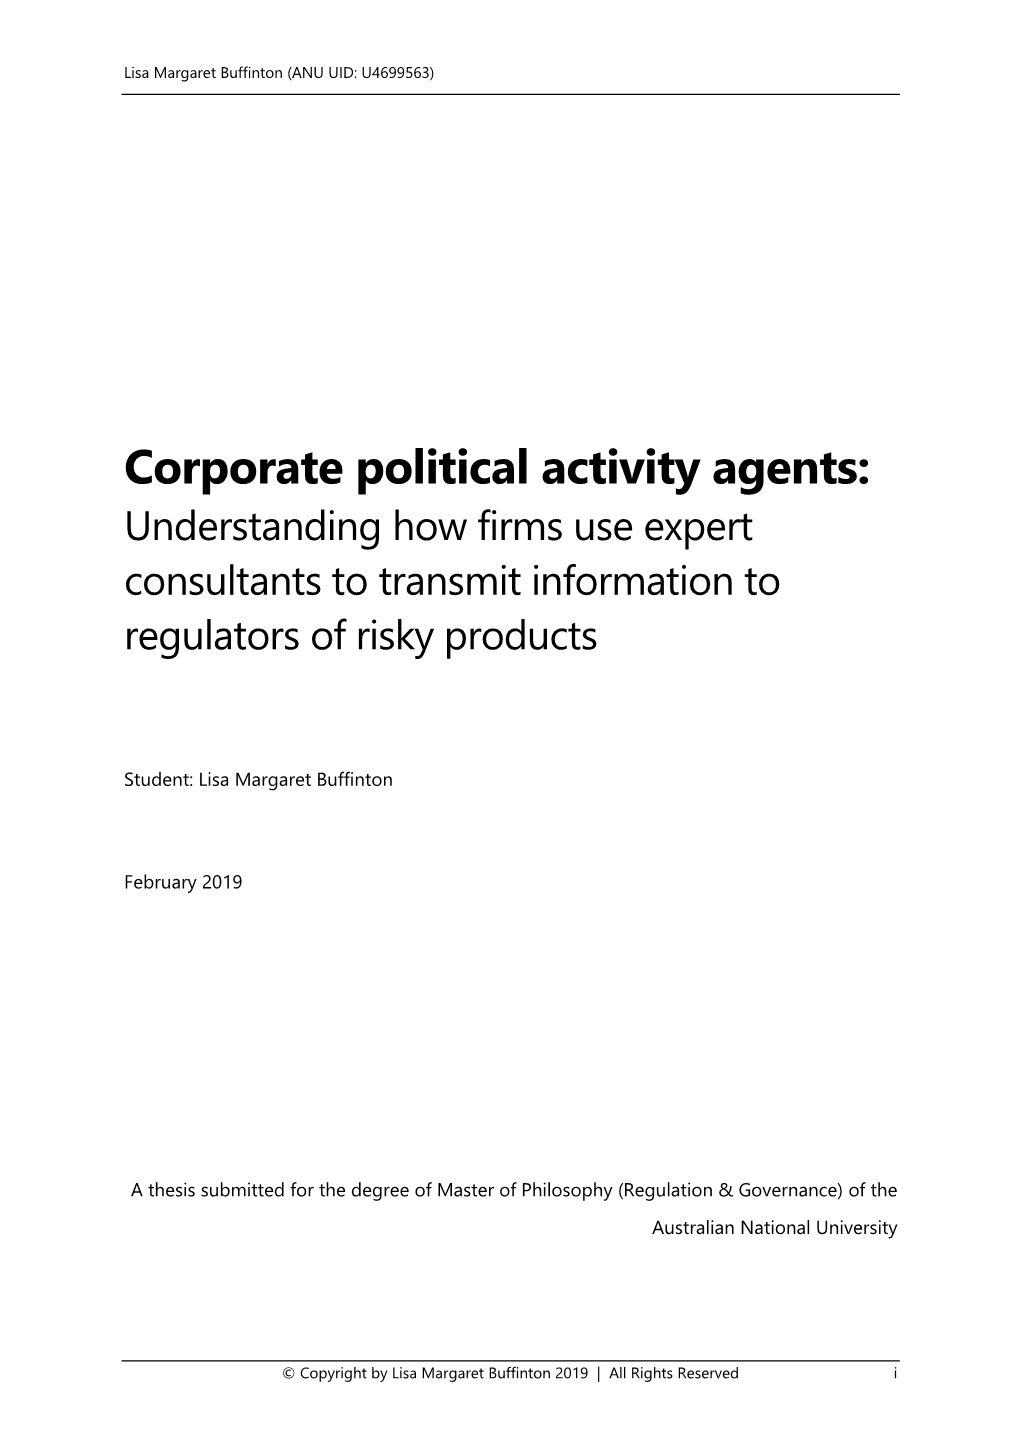 Corporate Political Activity Agents: Understanding How Firms Use Expert Consultants to Transmit Information to Regulators of Risky Products